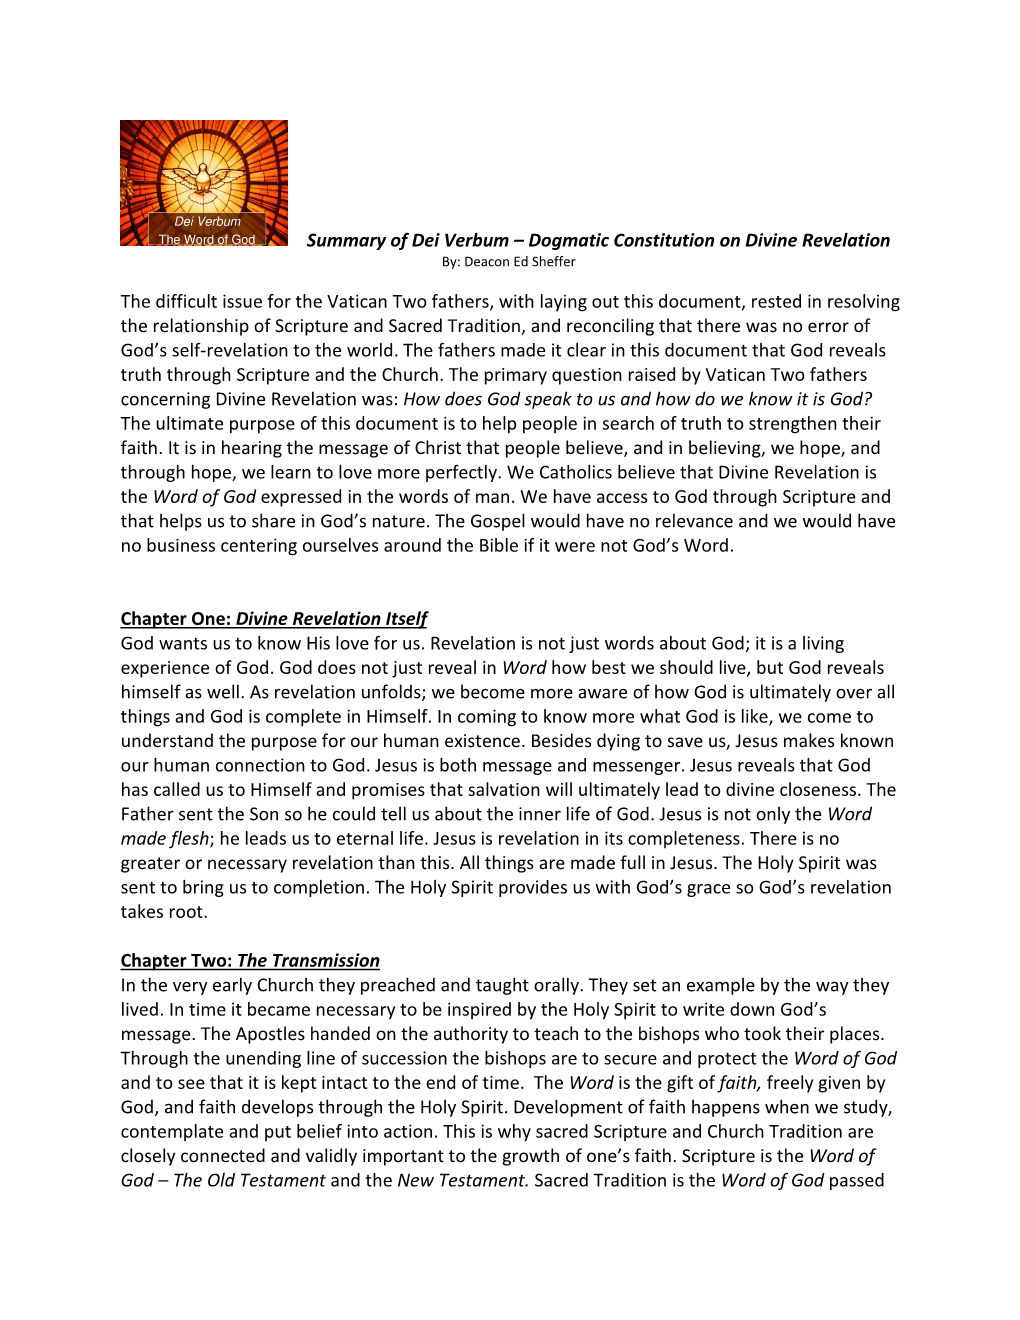 Summary of Dei Verbum – Dogmatic Constitution on Divine Revelation By: Deacon Ed Sheffer